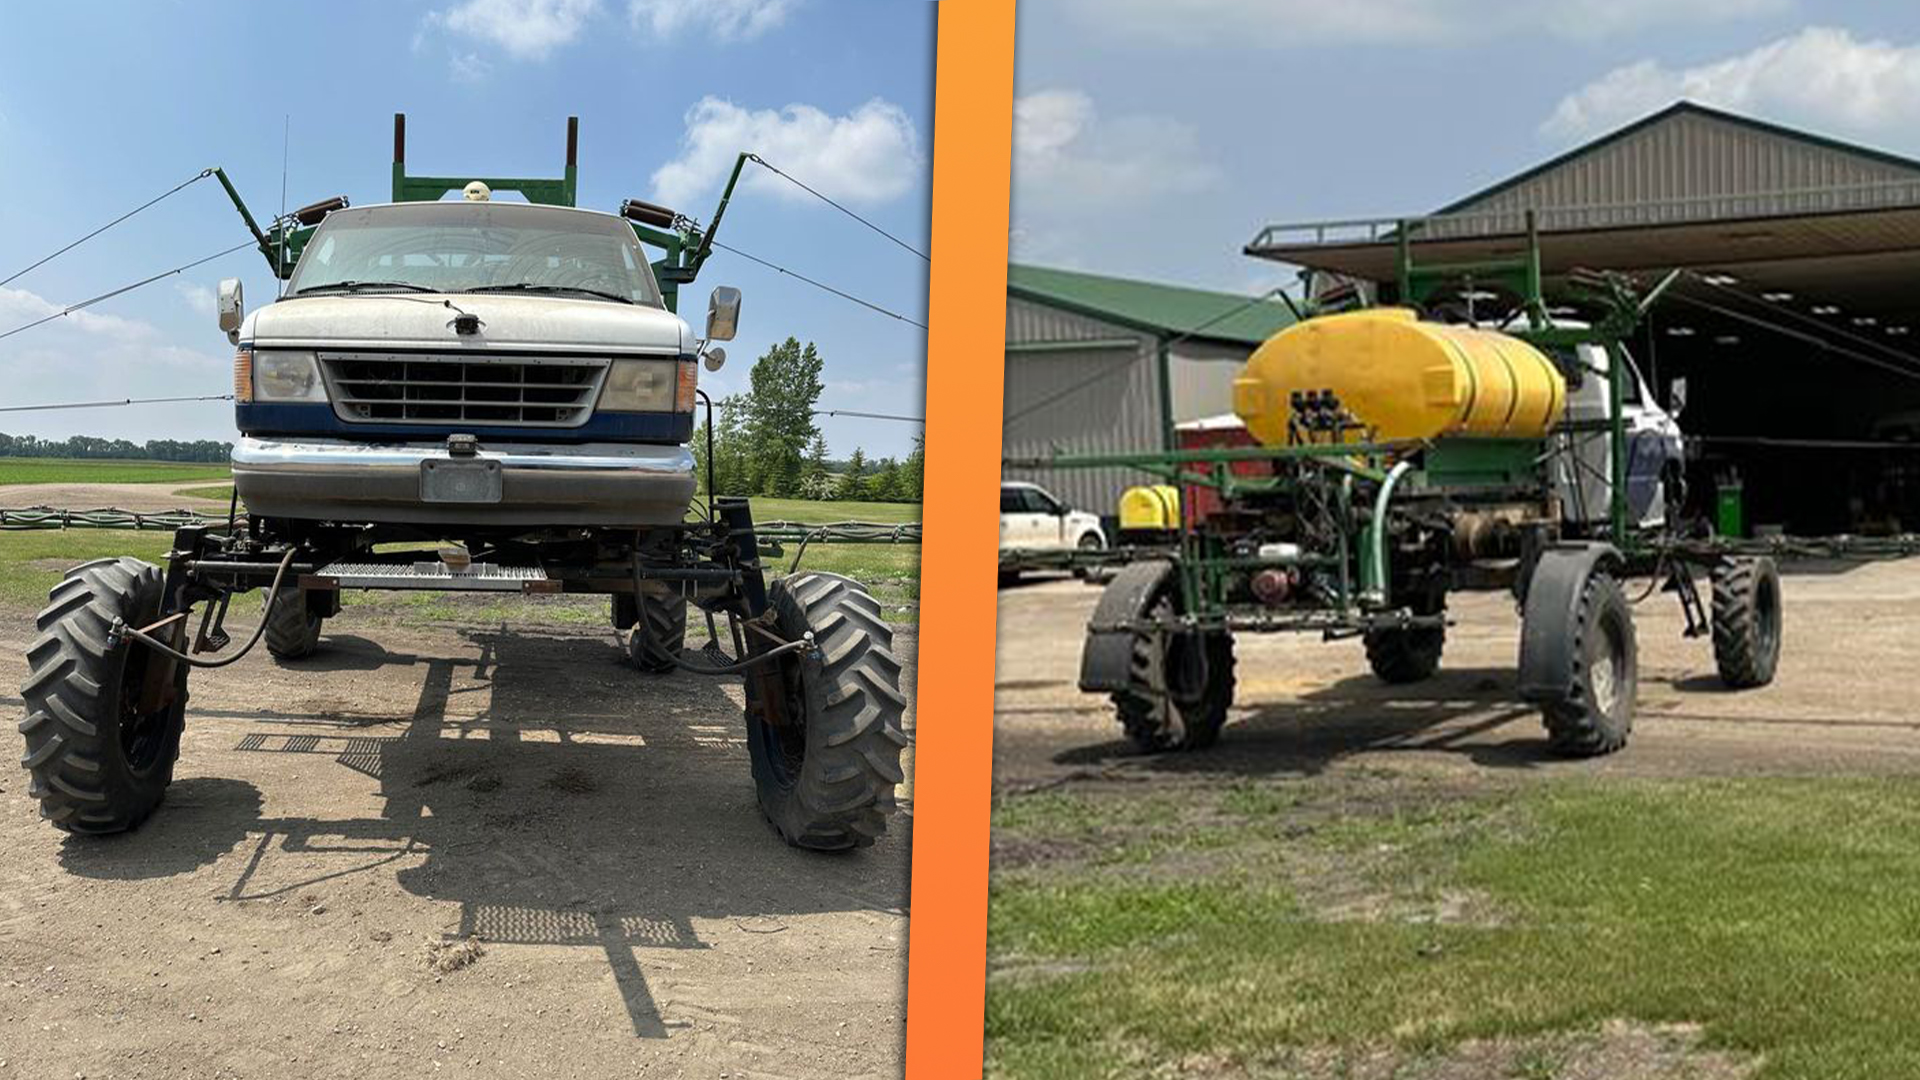 Buy This Homemade Farm Sprayer With a 7.3L Power Stroke Diesel Just to Say You Did